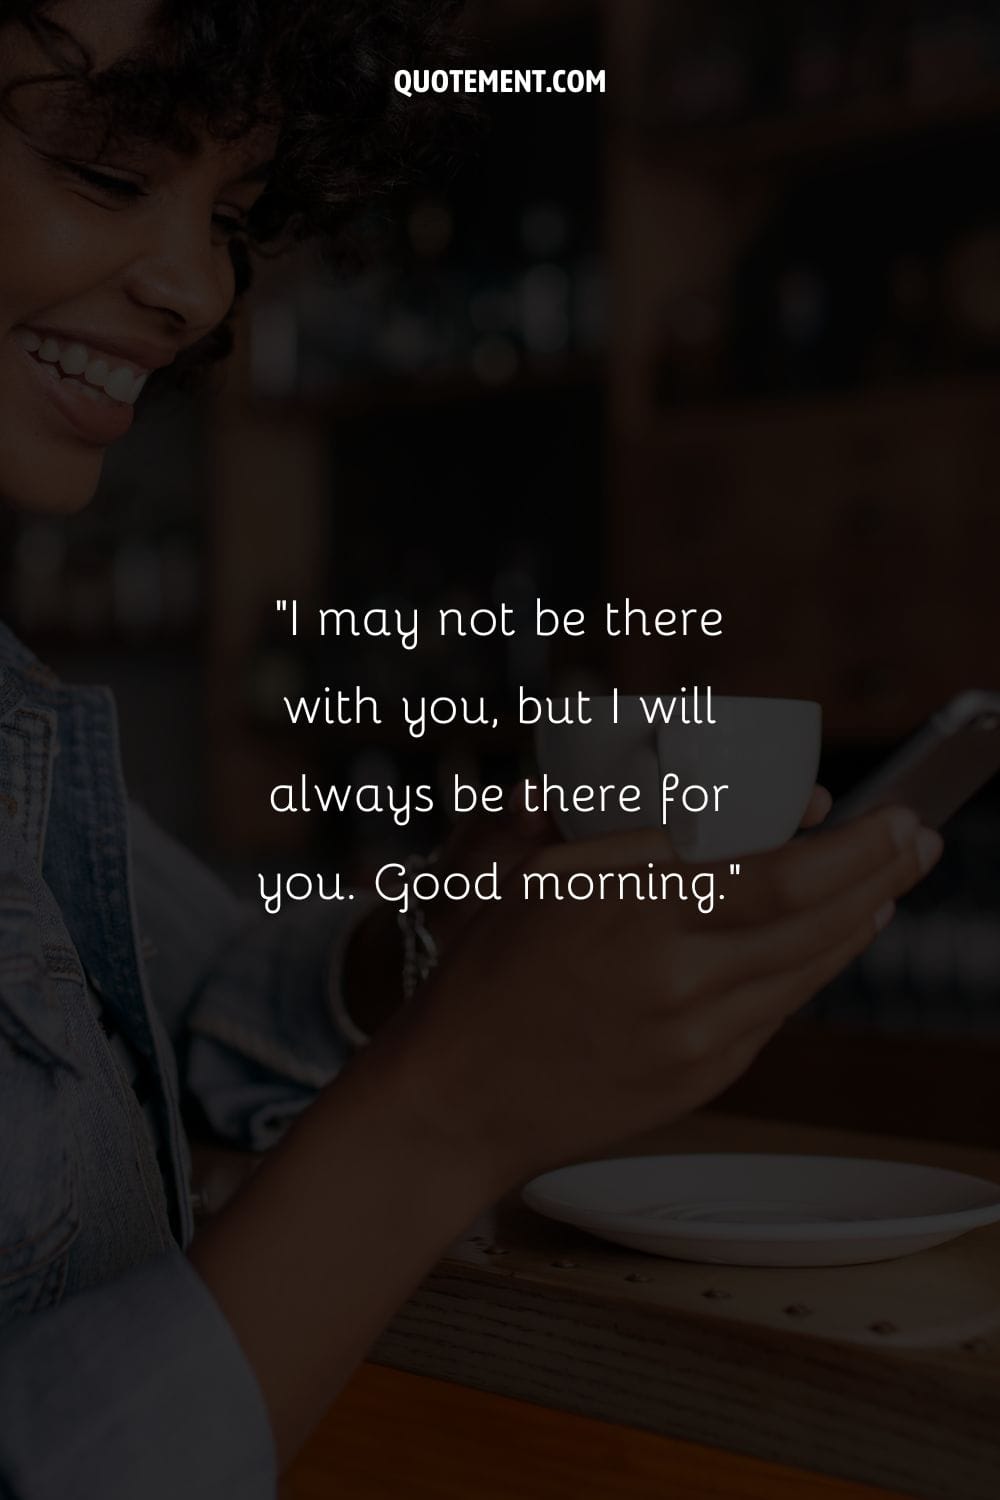 I may not be there with you, but I will always be there for you. Good morning.